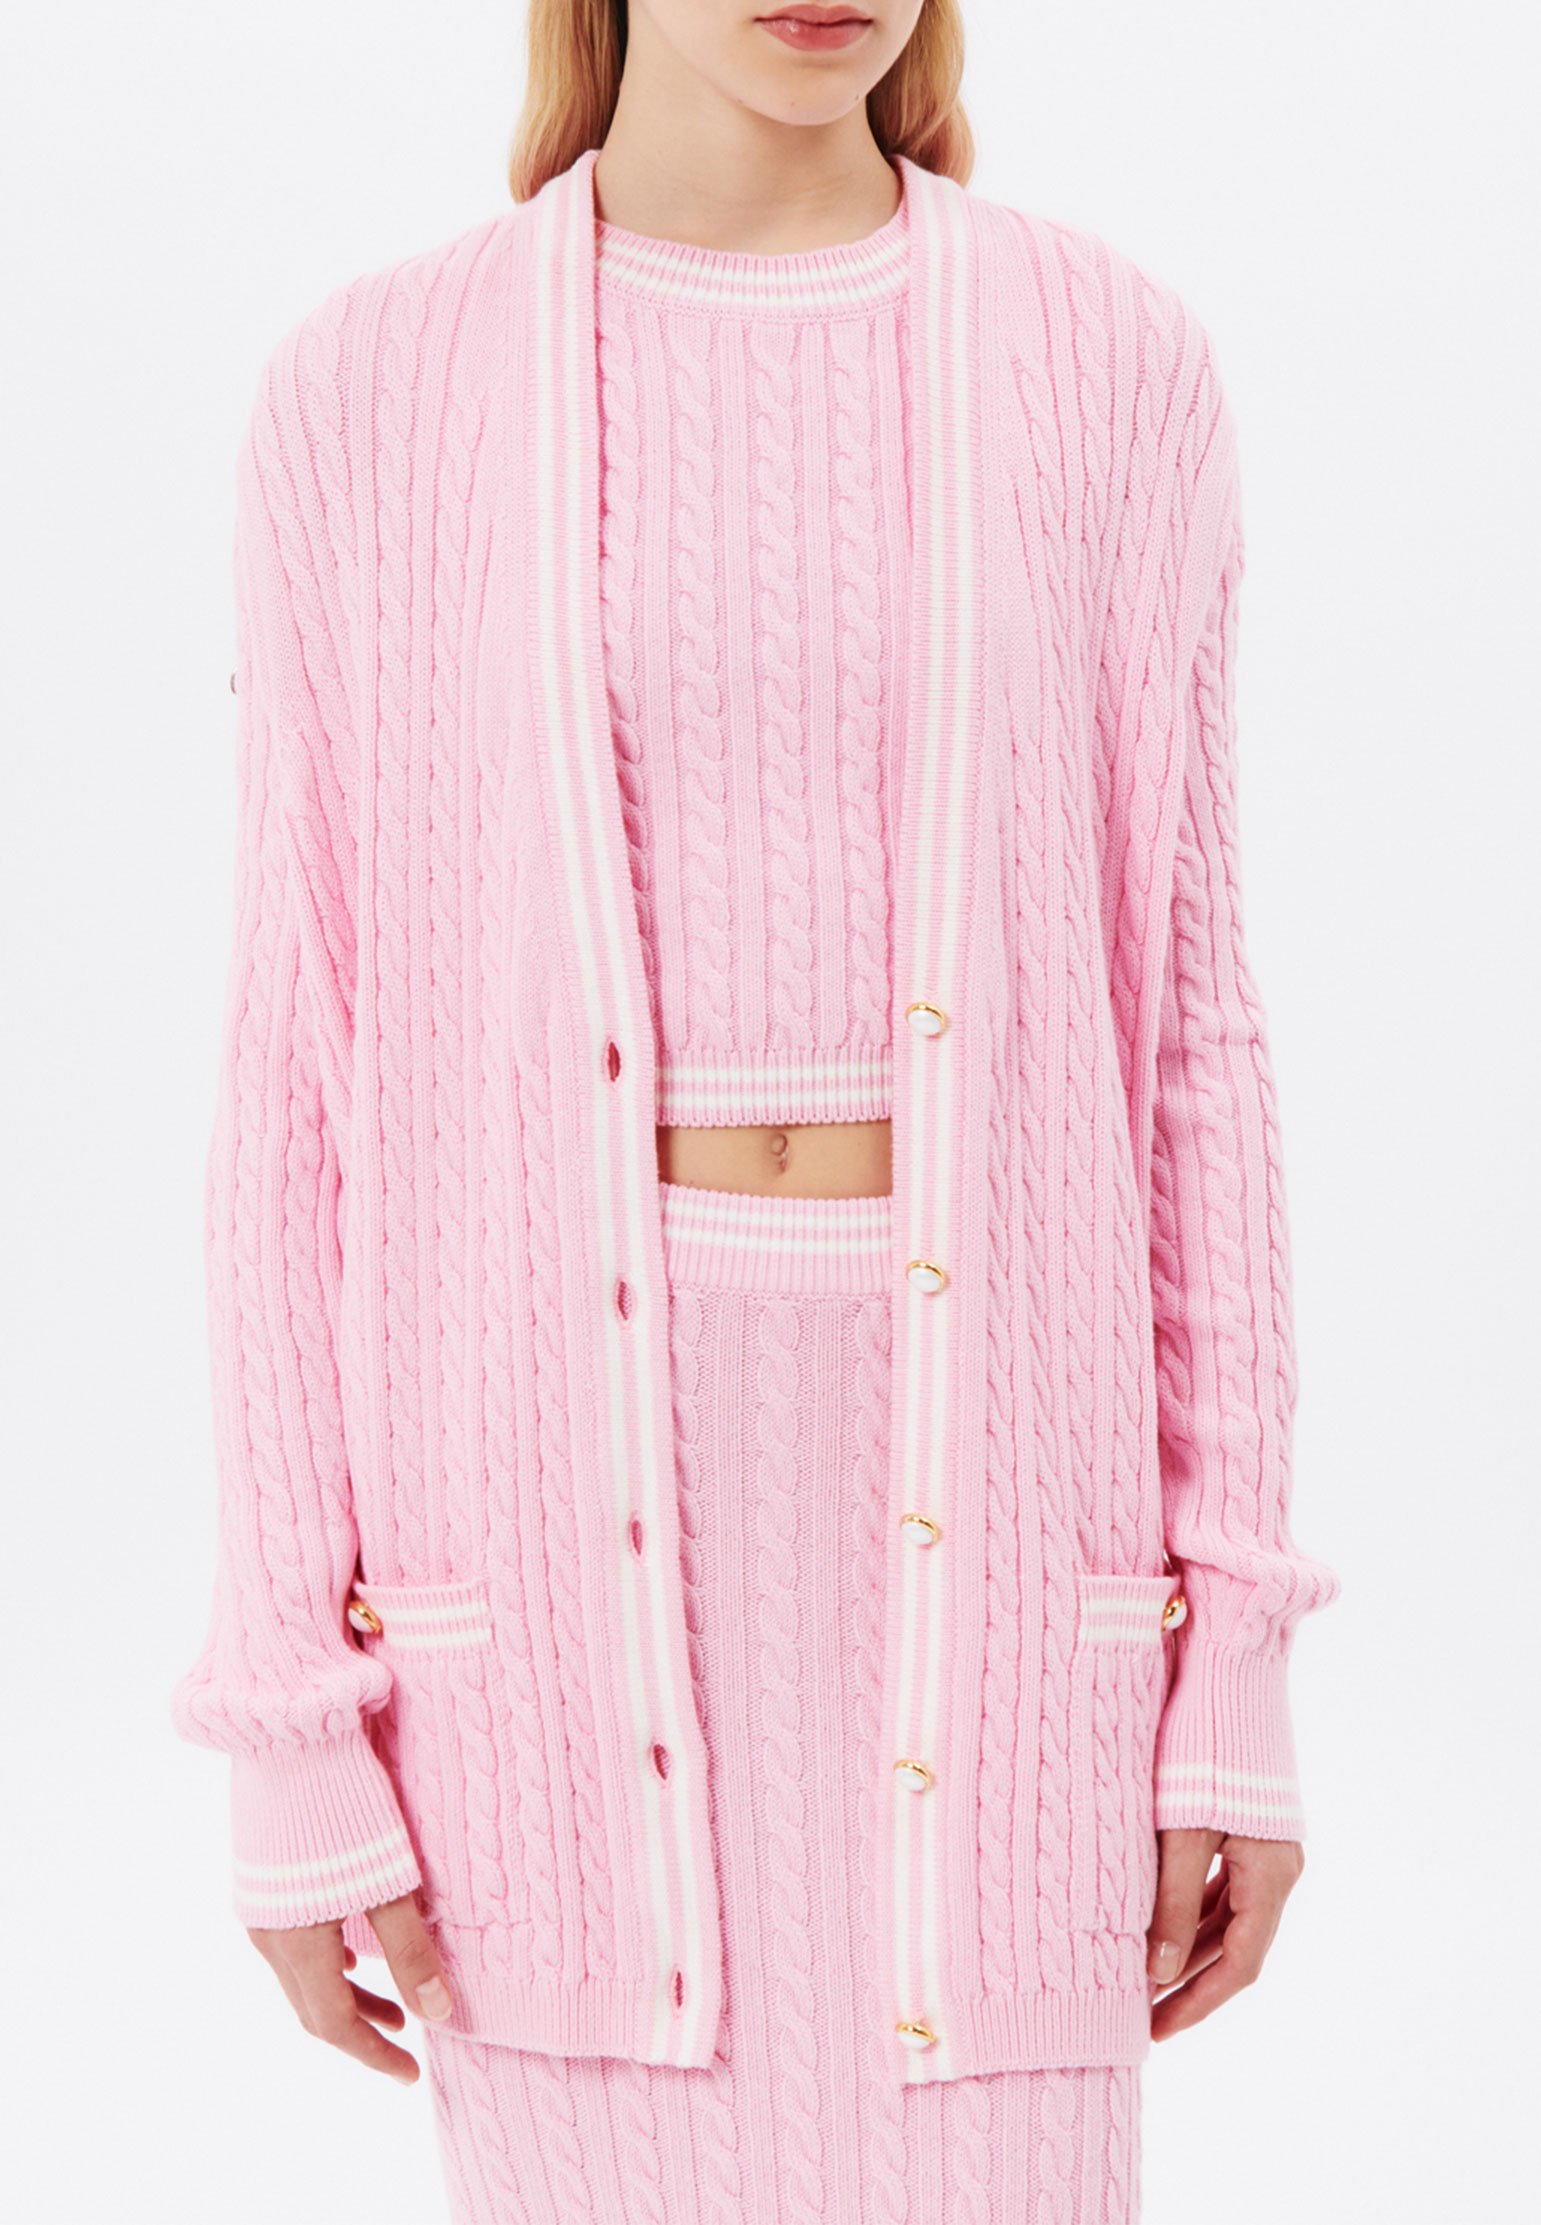 Cardigan ALESSANDRA RICH Color: pink (Code: 3739) in online store Allure